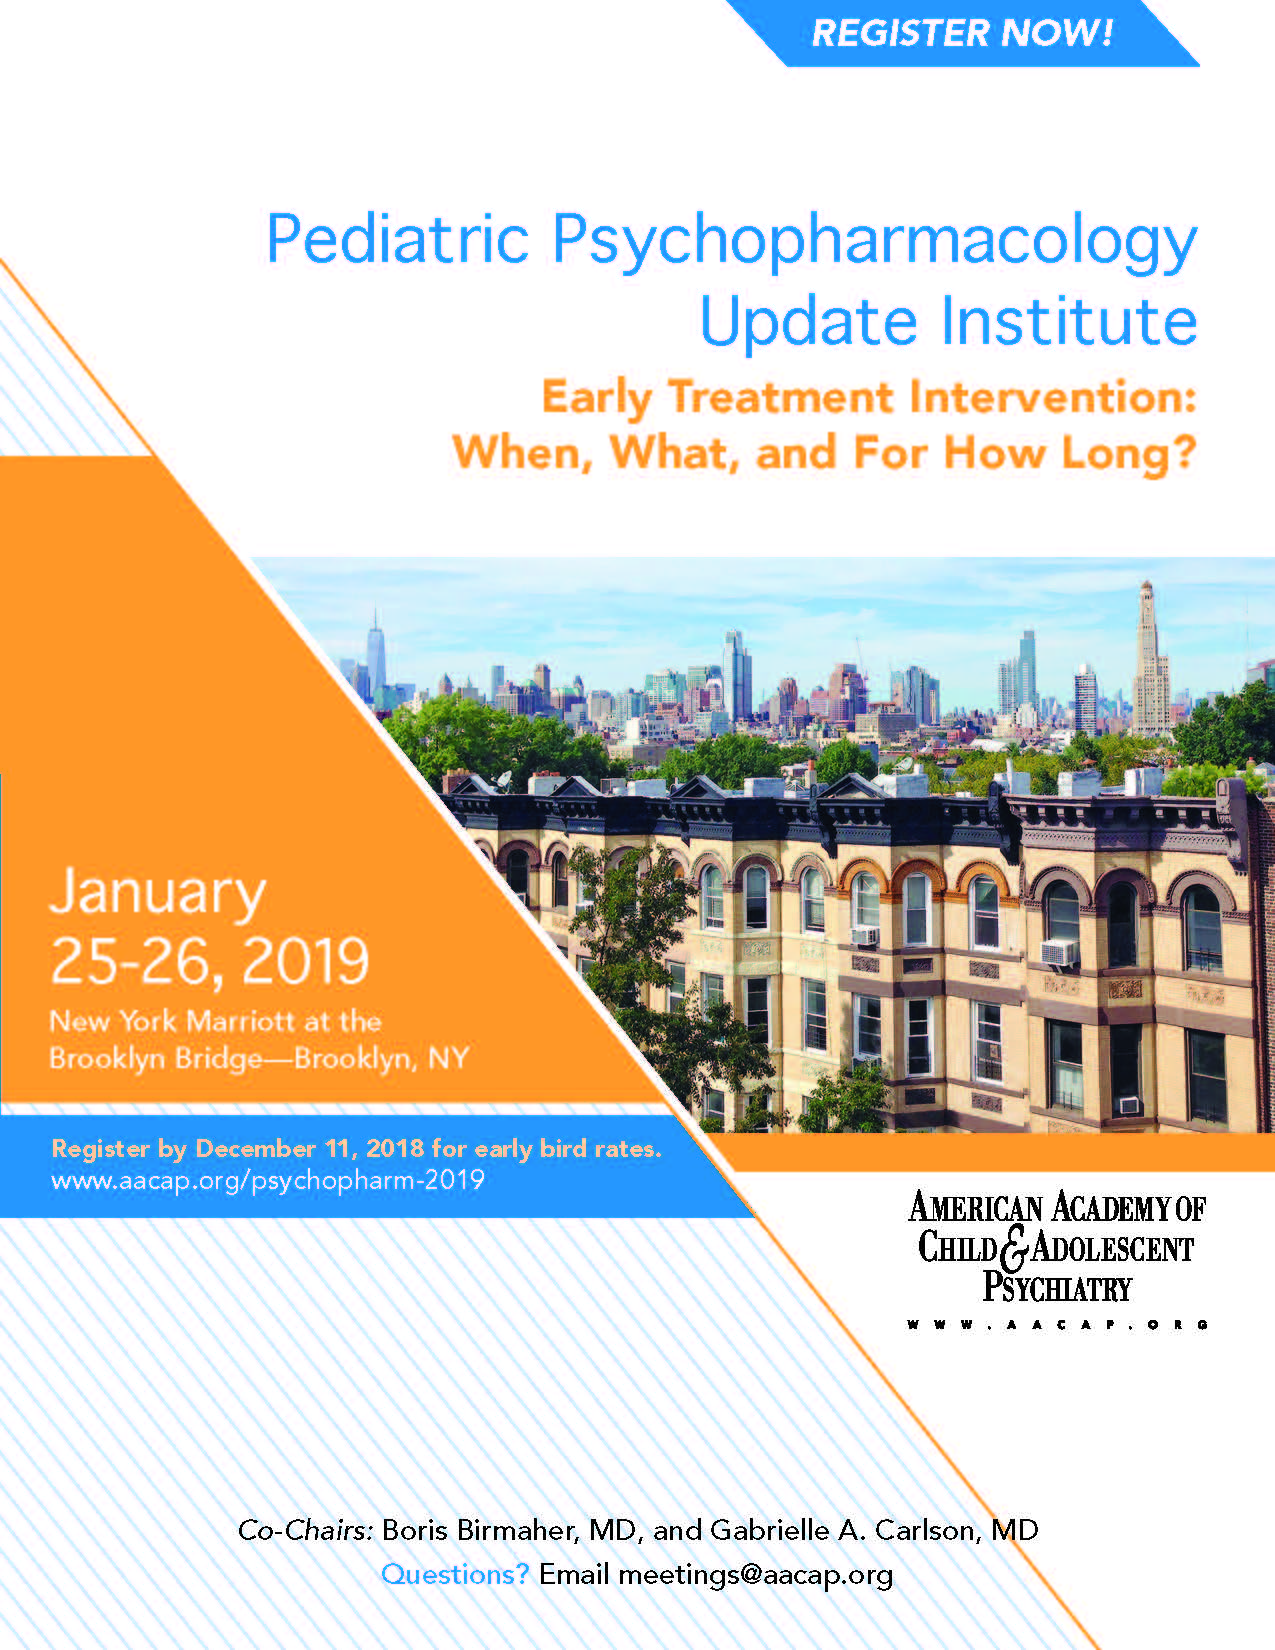 AACAP Pediatric Psychopharmacology Update Institute Primary Care